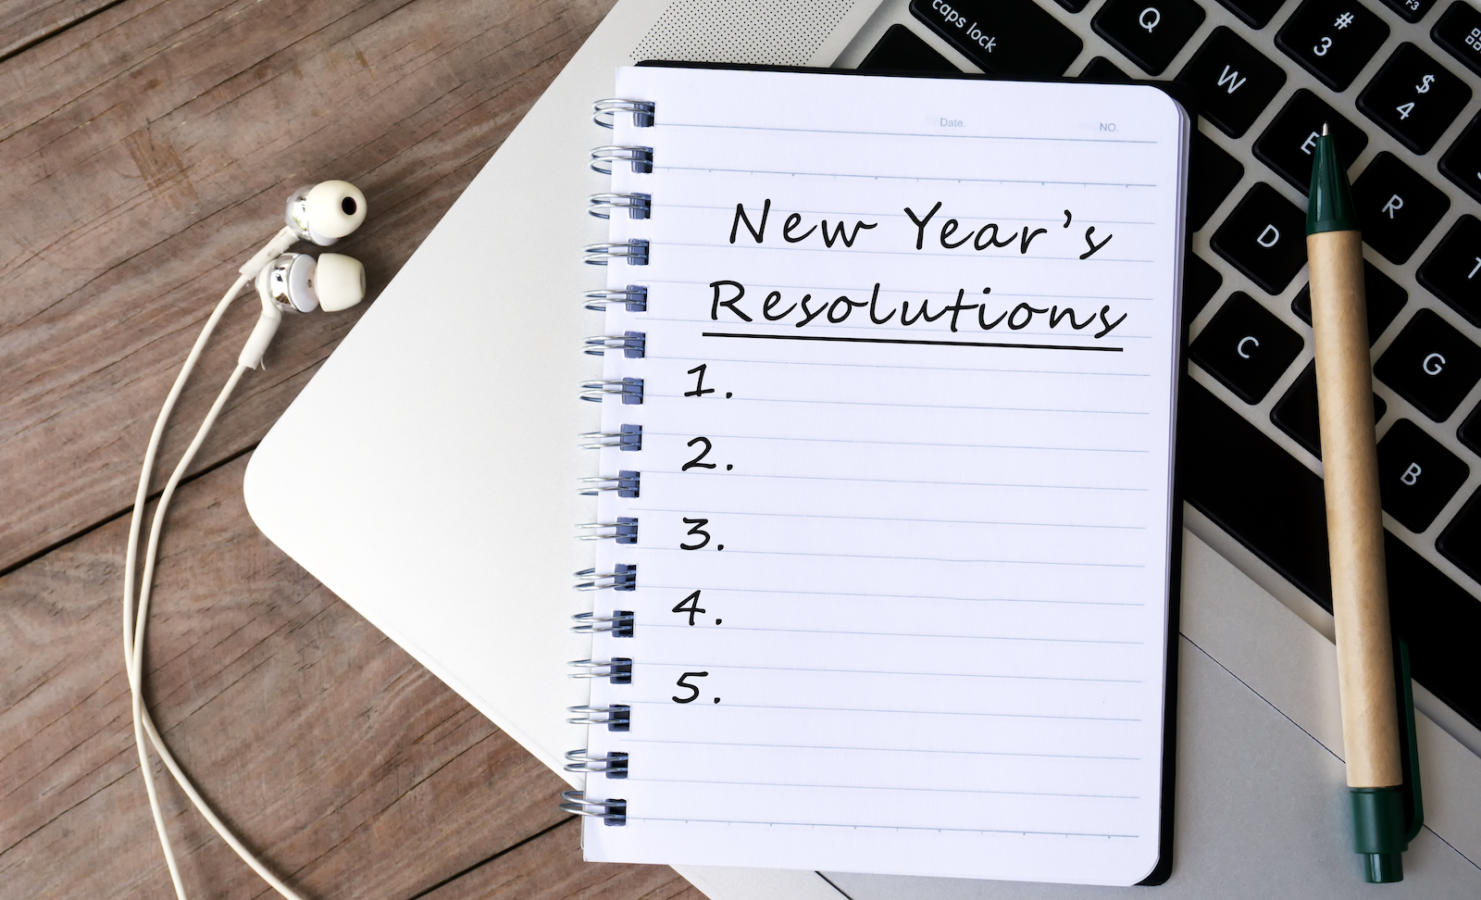 4 Helpful Tips To Stick To Your New Years' Resolutions